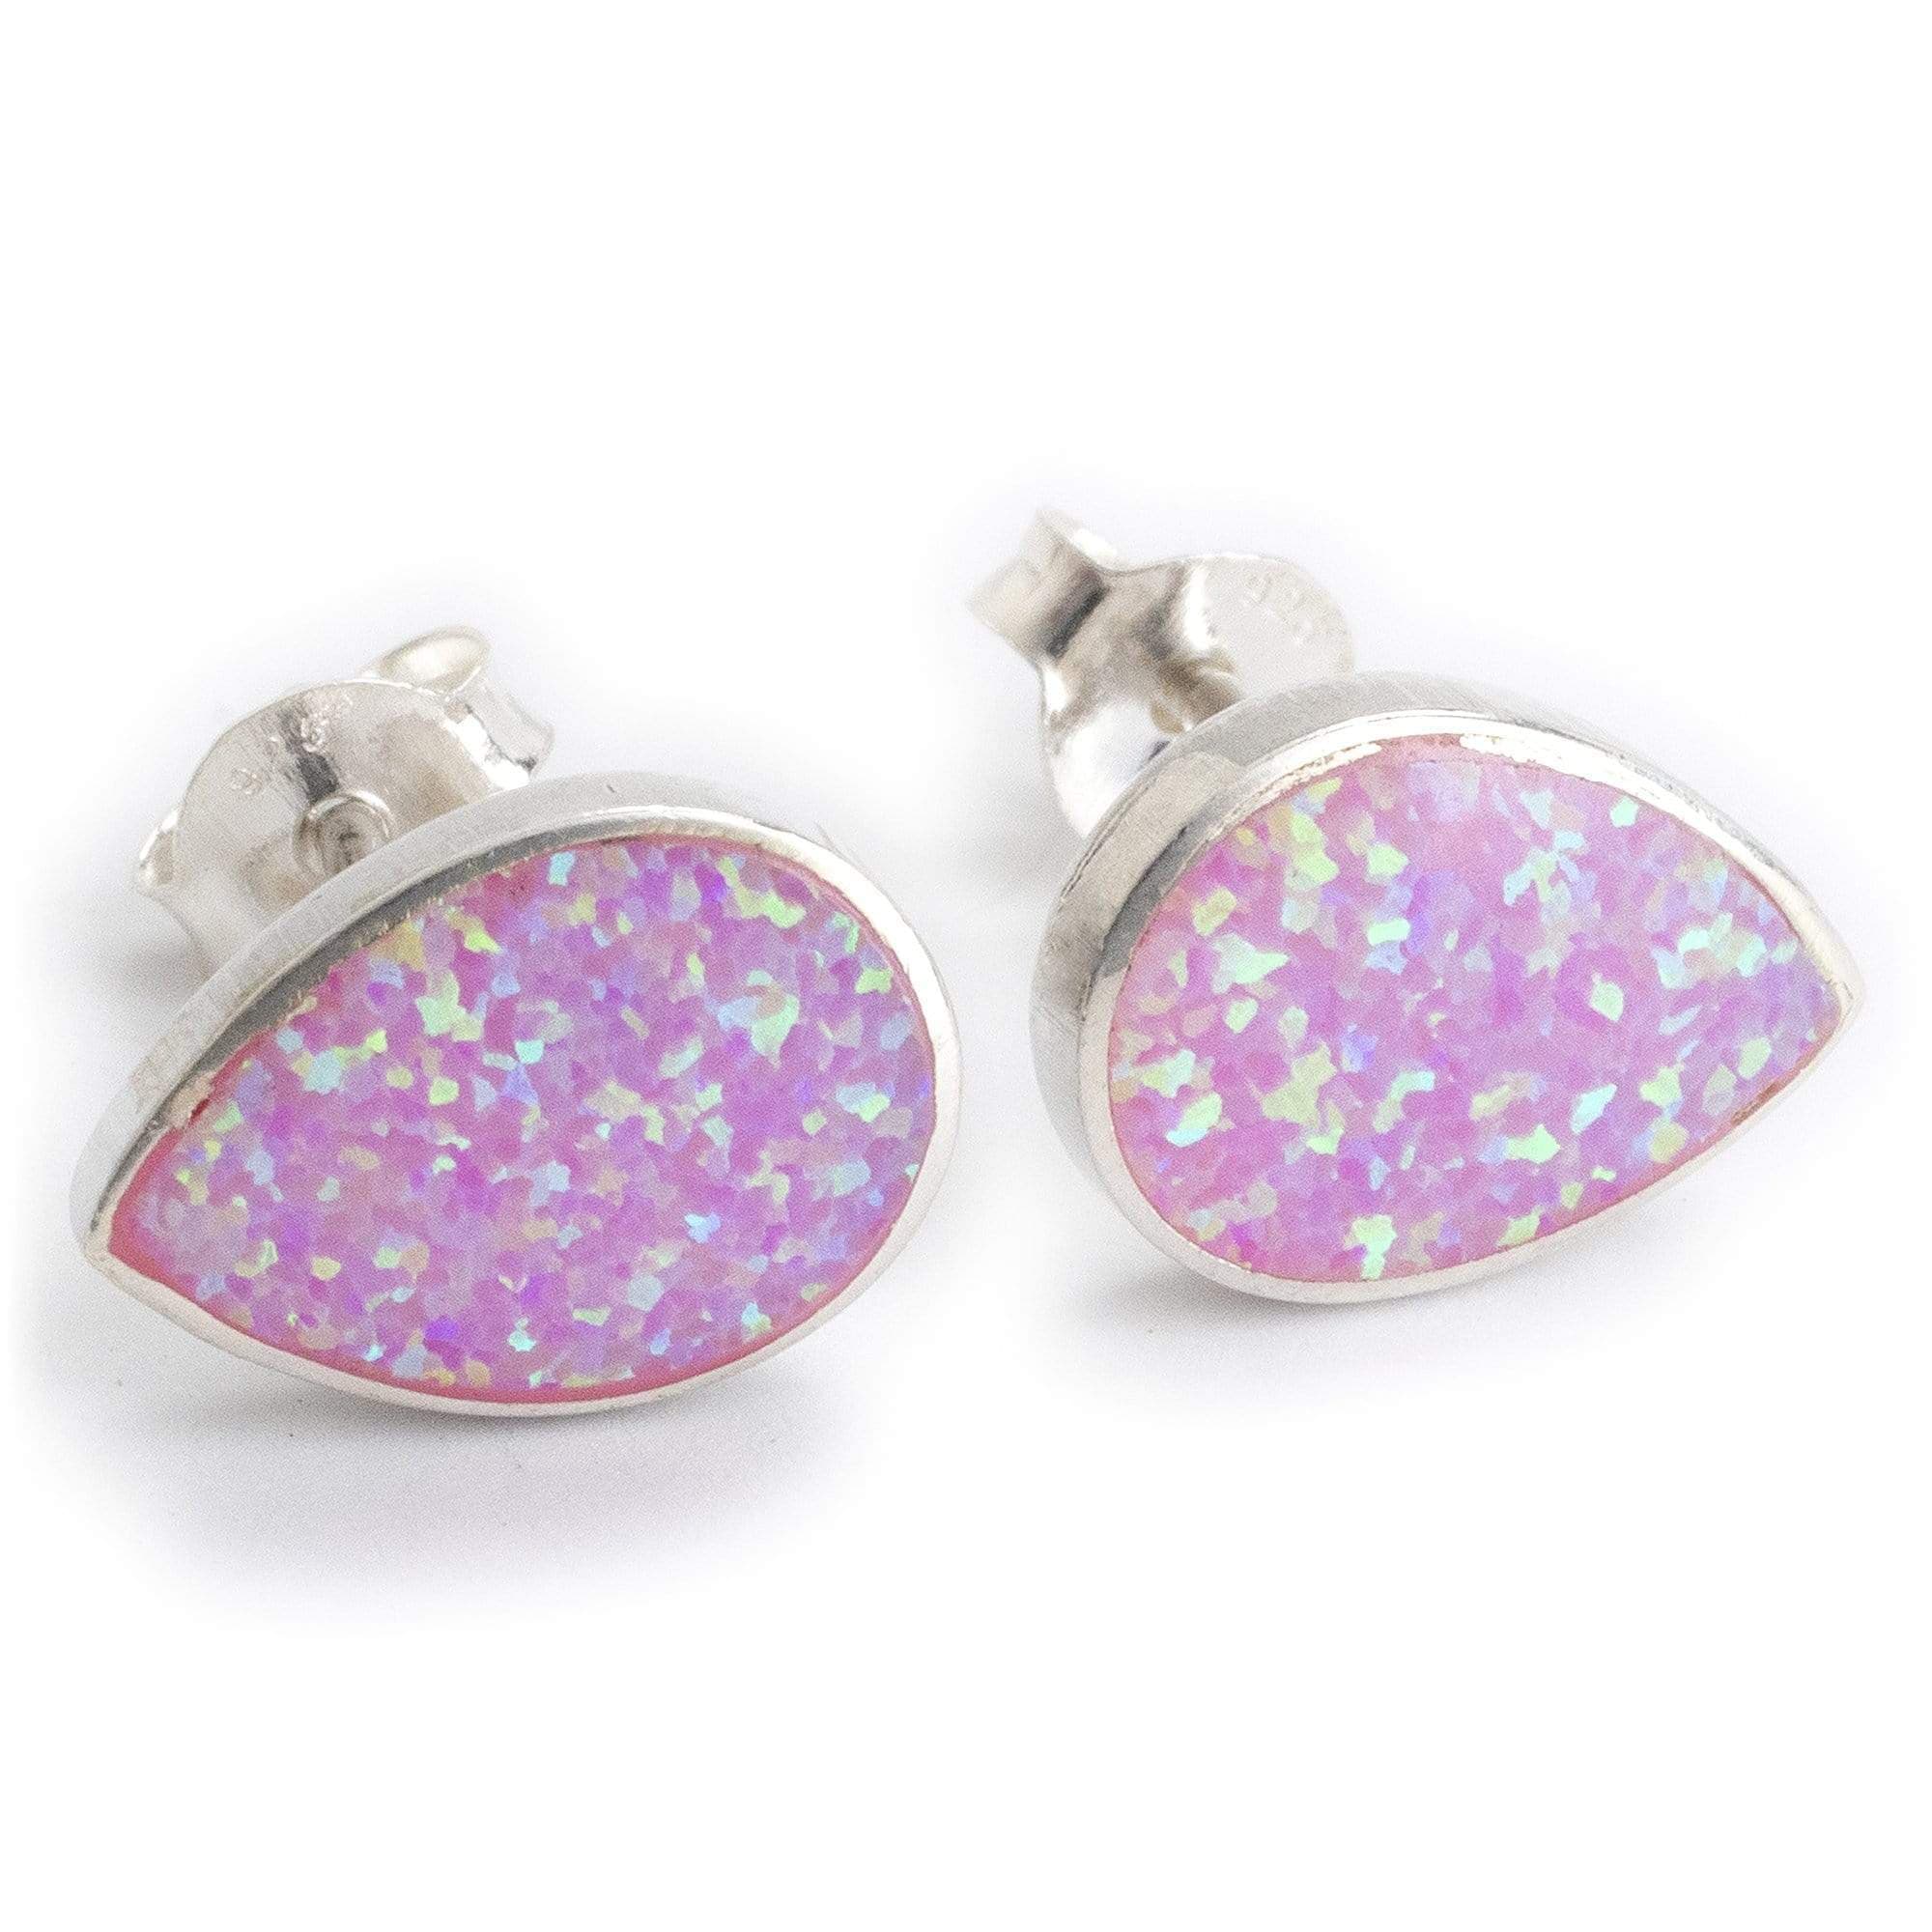 Kalifano Southwest Silver Jewelry Pink Opal Oval 925 Sterling Silver Earring with Stud Backing Handmade NME.0022.PO